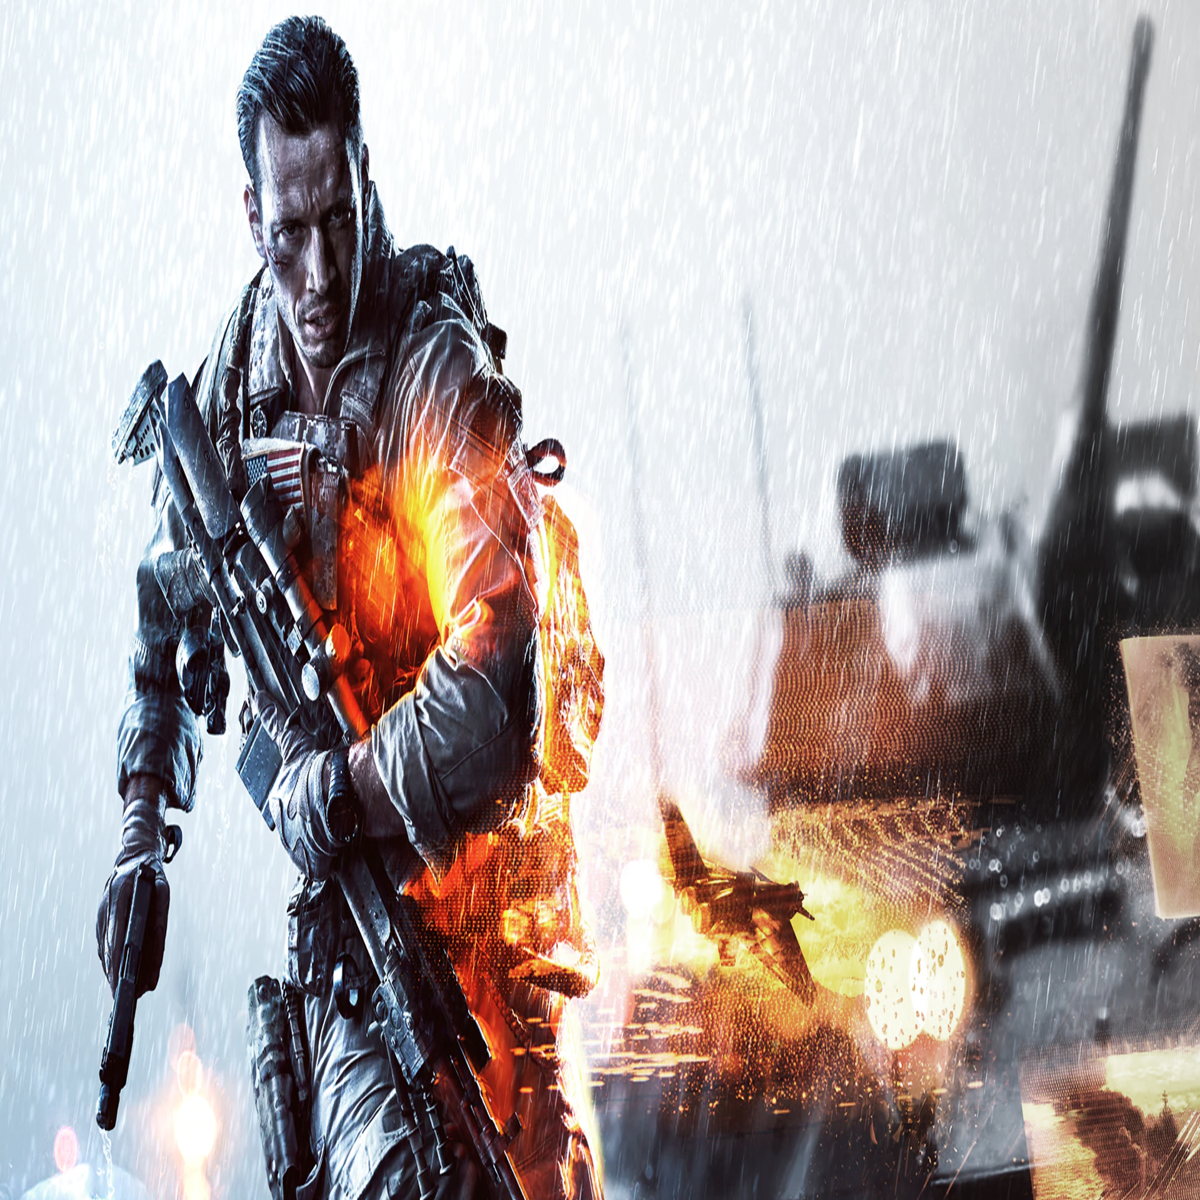 Battlefield 4 Premium Edition out in October